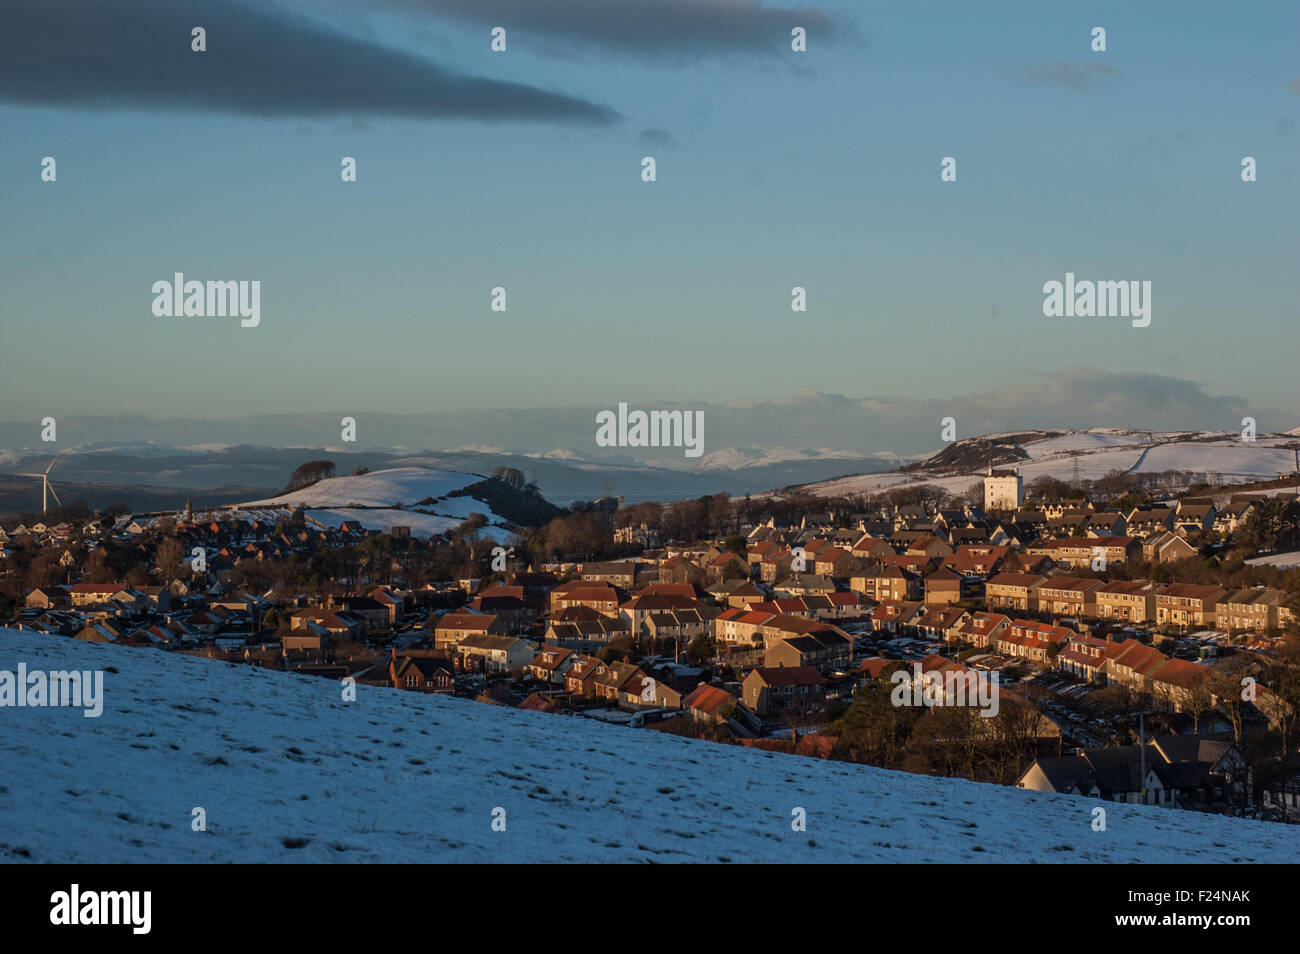 Beautifully picturesque town of West Kilbride nestled in between local hills and covered in snow on a sunny winters day Stock Photo